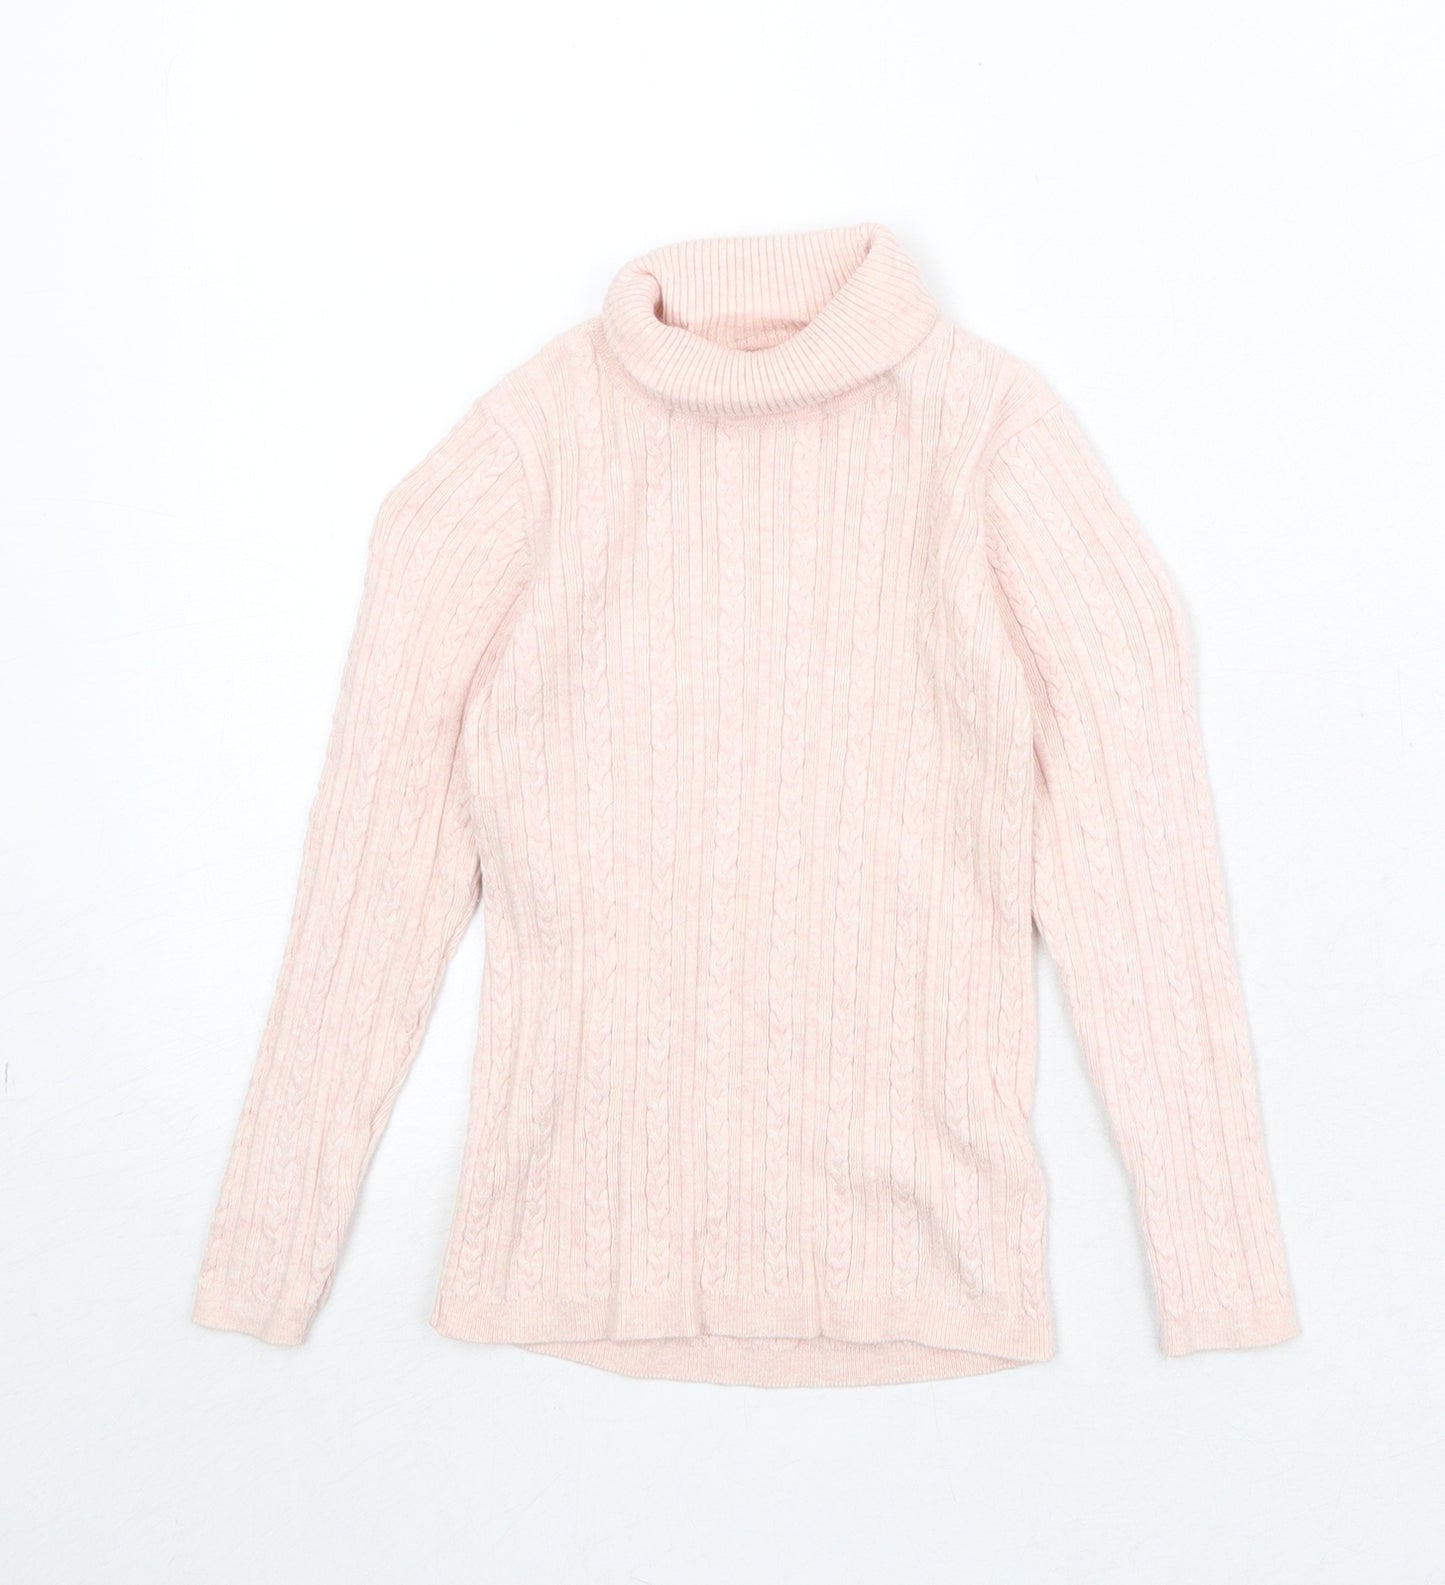 NEXT Girls Pink Cotton Basic T-Shirt Size 4-5 Years Roll Neck Pullover